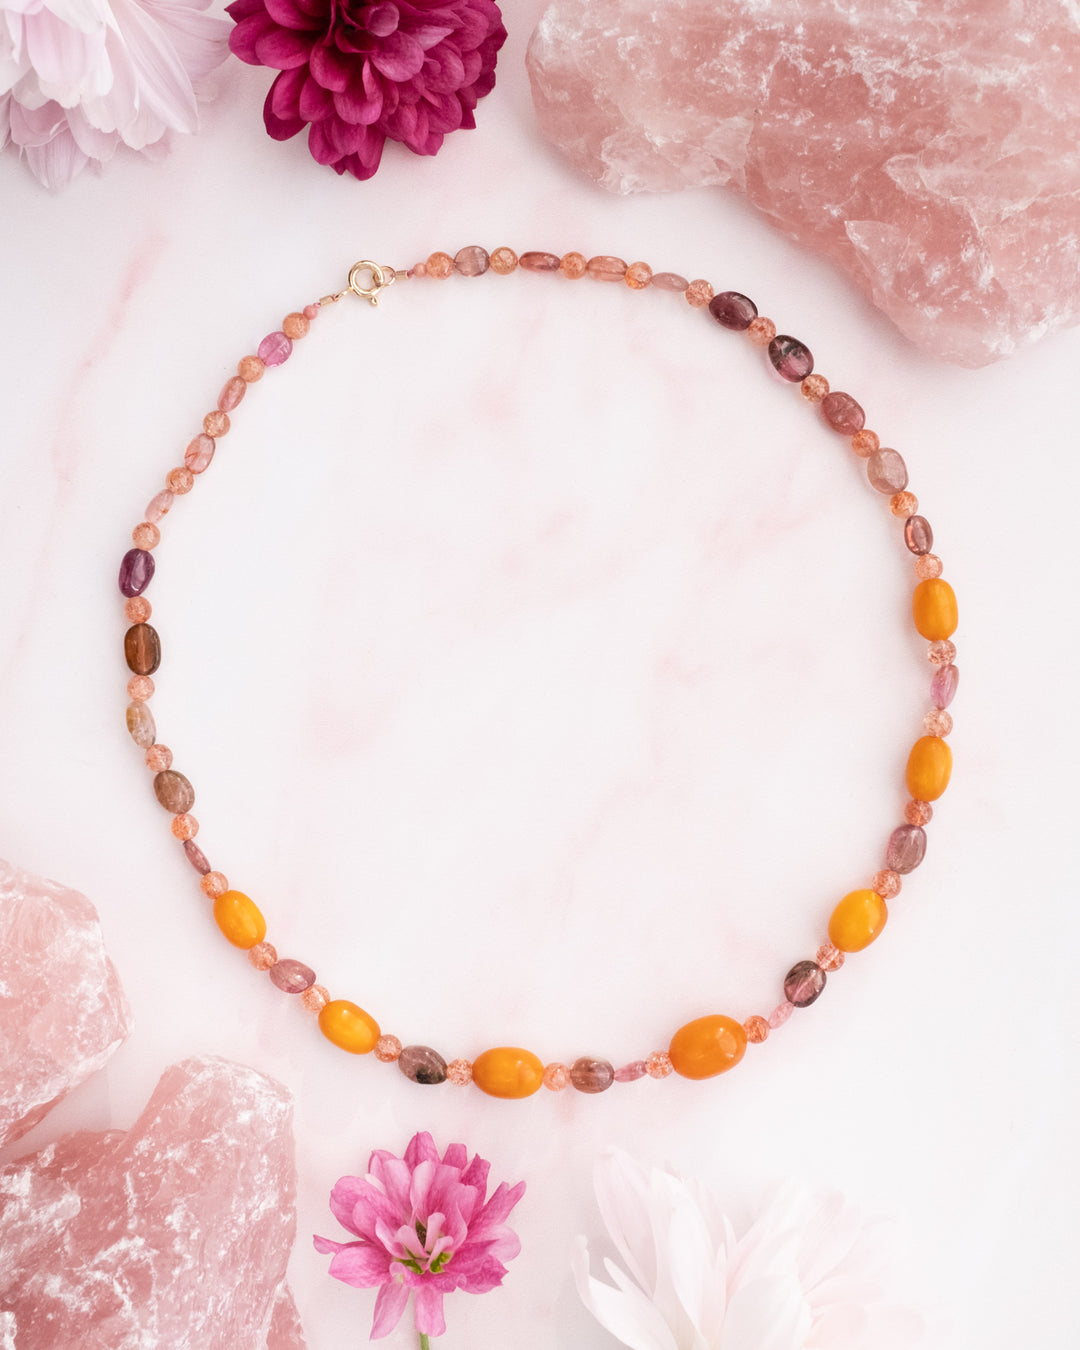 Vintage Amber, Sunstone & Pink Tourmaline Beaded Necklace - The Healing Pear